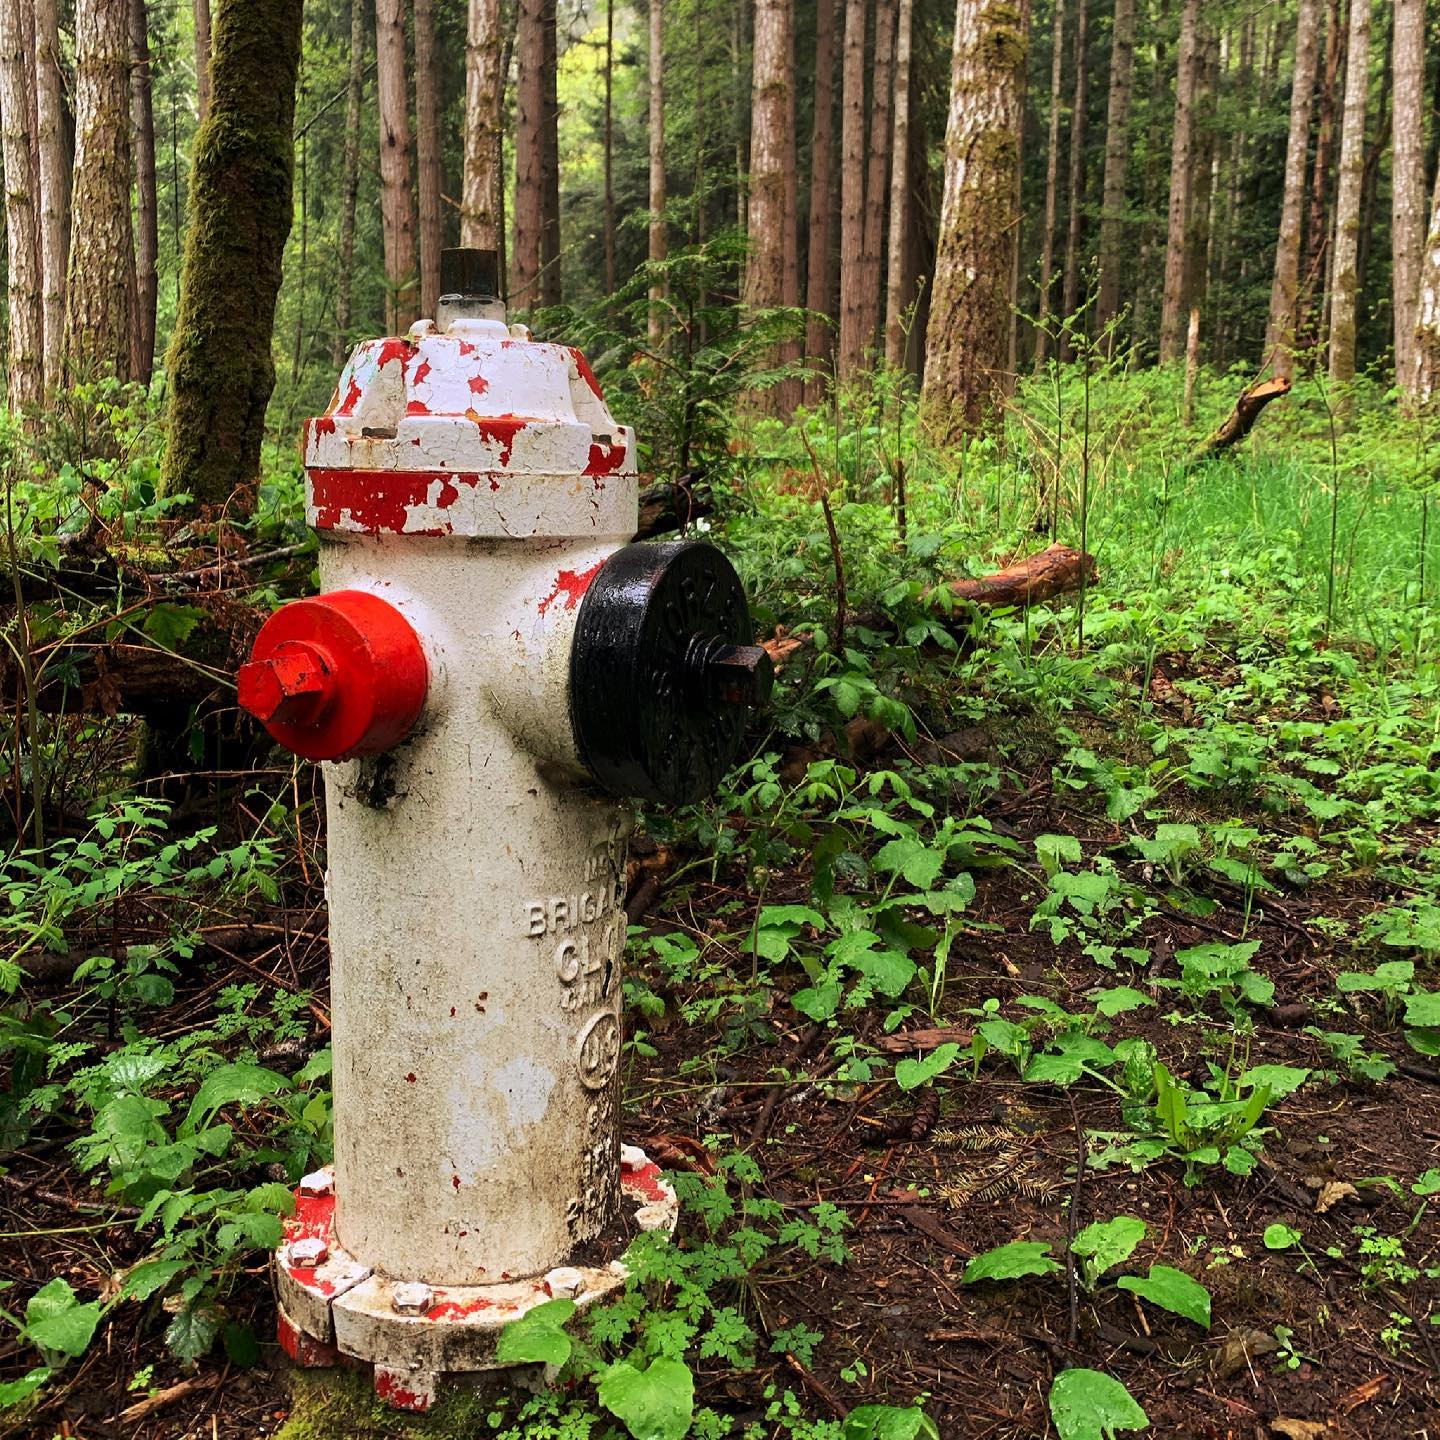 If you go out in the woods …#dogwalk #firehydrant #aged #photography #yyj #royalroads #royalroadsuniversity